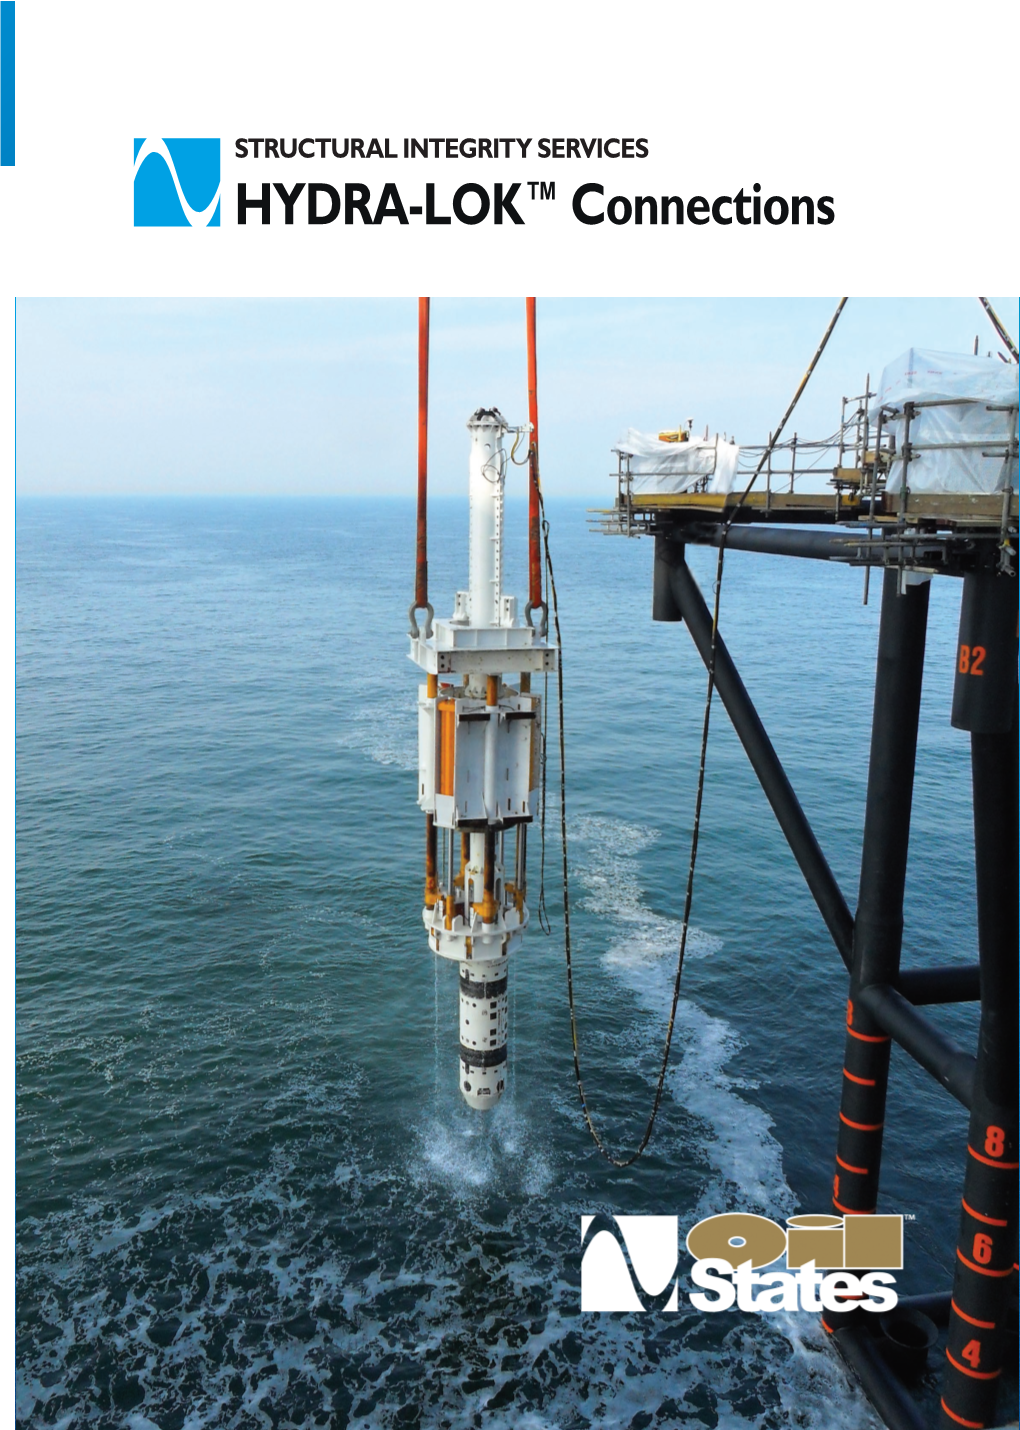 HYDRA-LOK™ Connections STRUCTURAL INTEGRITY & ABANDONMENT SERVICES HYDRA-LOK™ Connections